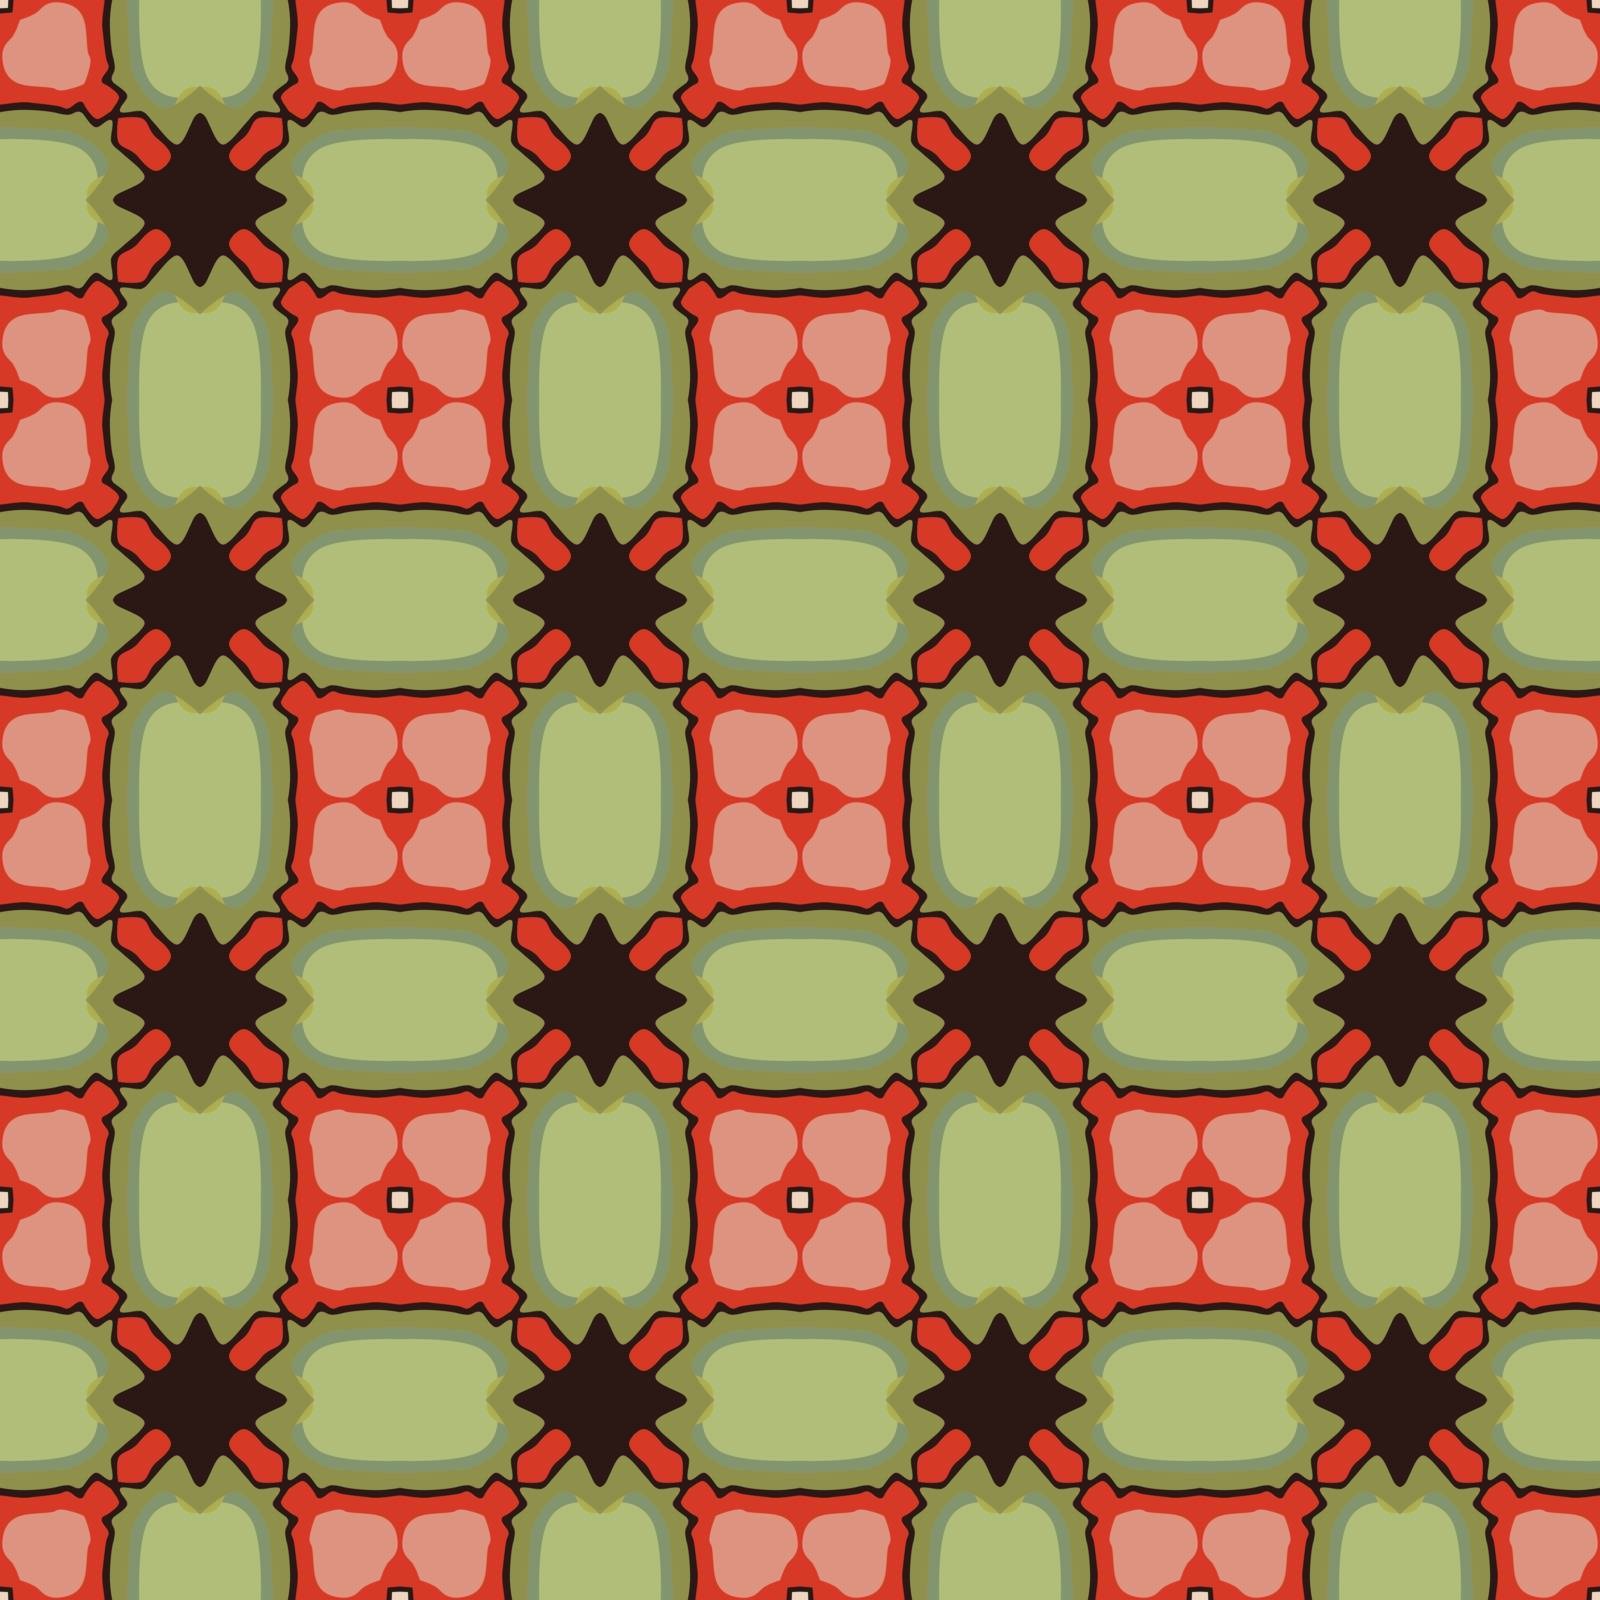 Seamless illustrated pattern made of abstract elements in beige, red, green, pink and black